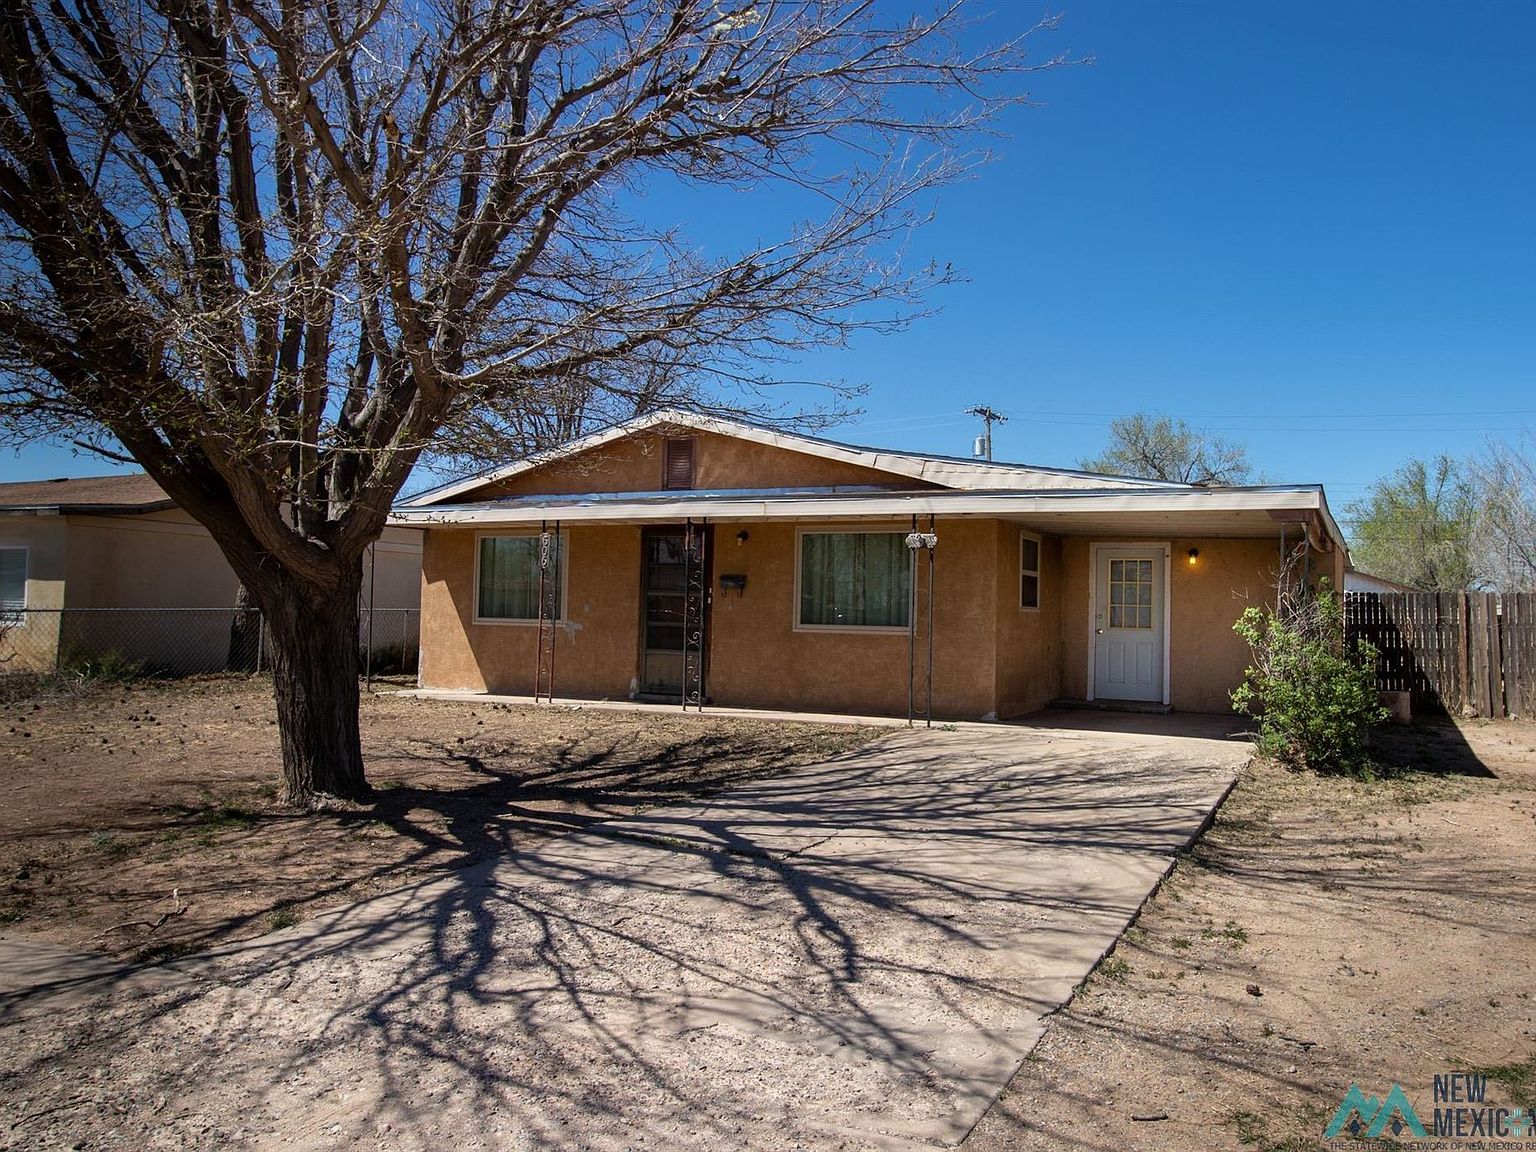 506 S Fir Ave, Roswell, NM 88203 | Zillow